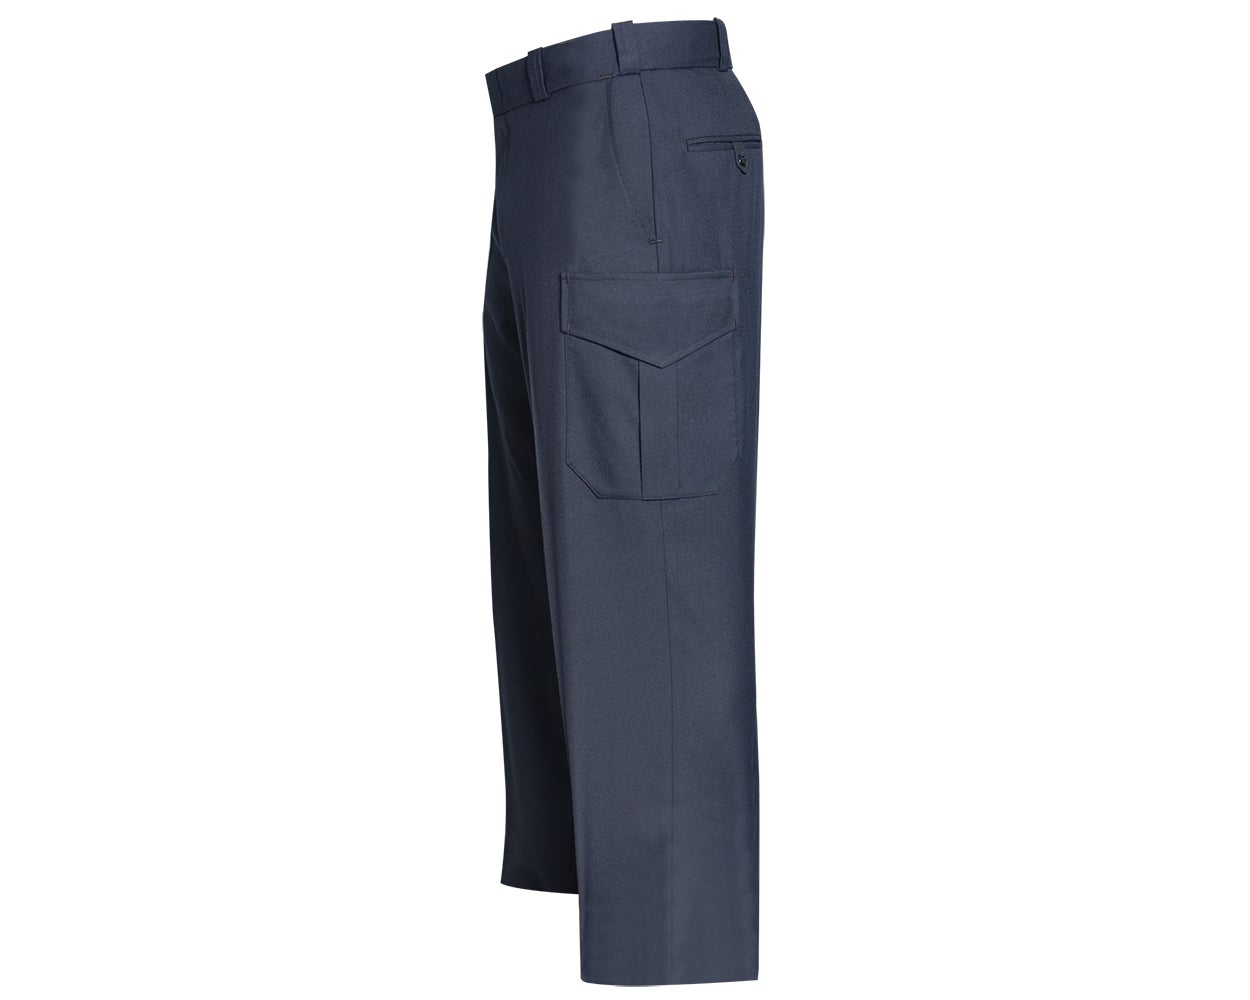 Flying Cross Command 100% Polyester Men's Uniform Pants with Cargo Pockets - LAPD Navy 3990086 - Newest Products